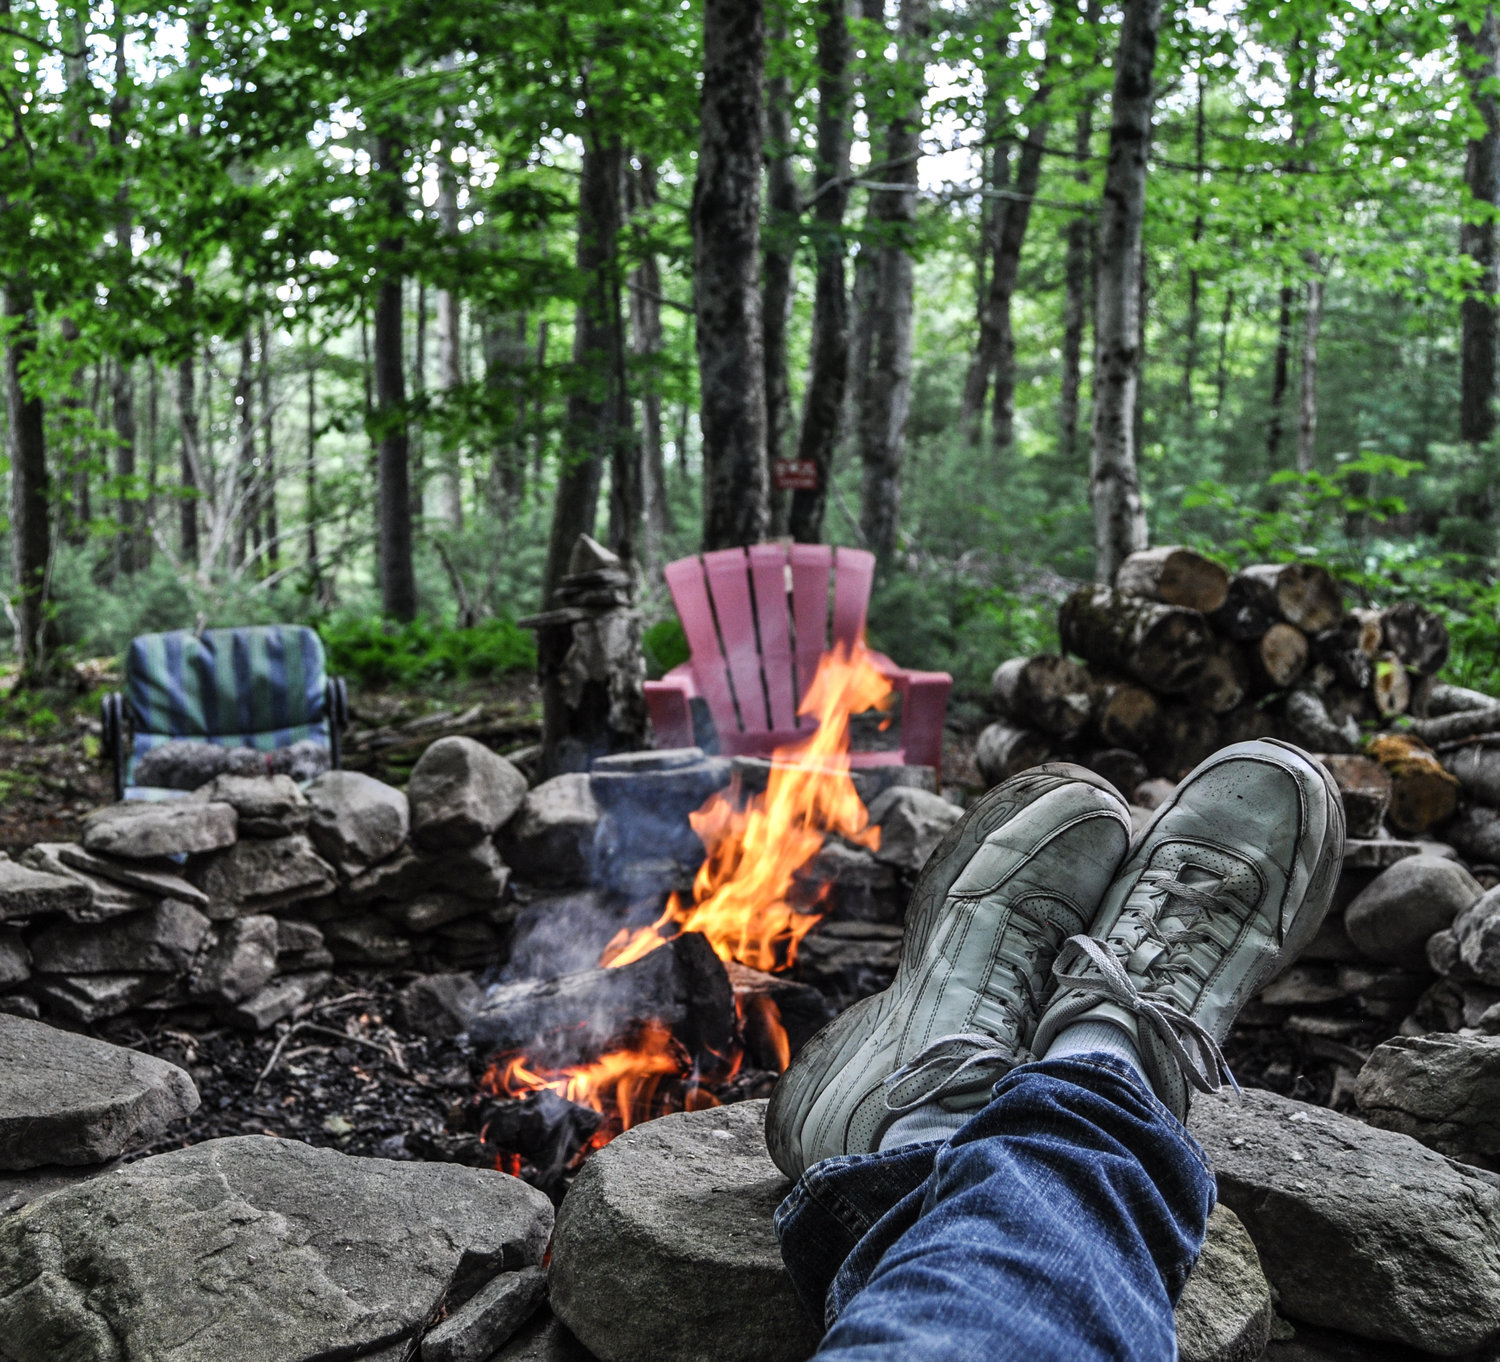 You may be anxious (like me) to put on a plaid shirt, strut around all life-in-the-woodsy and burn stuff in your fire pit, but there are strict rules to follow.